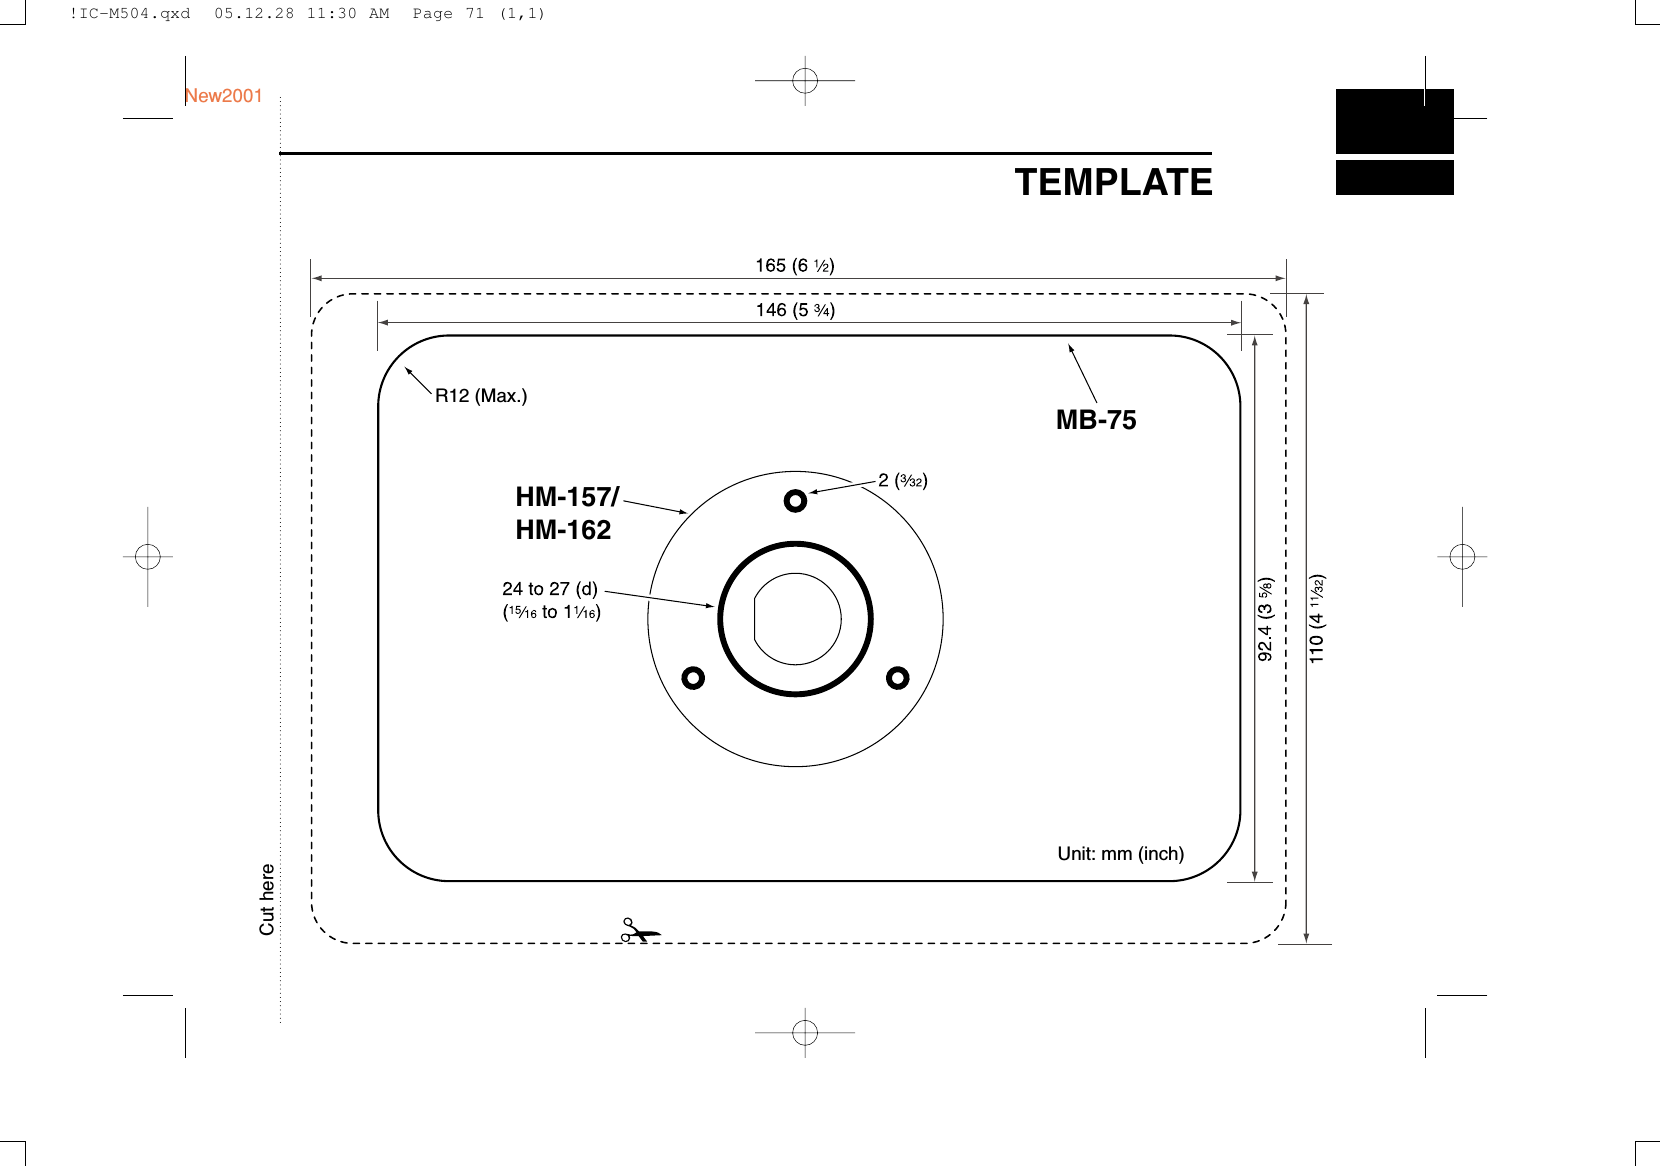 New2001TEMPLATEHM-157/HM-162Unit: mm (inch) R12 (Max.)MB-75Cut here!IC-M504.qxd  05.12.28 11:30 AM  Page 71 (1,1)